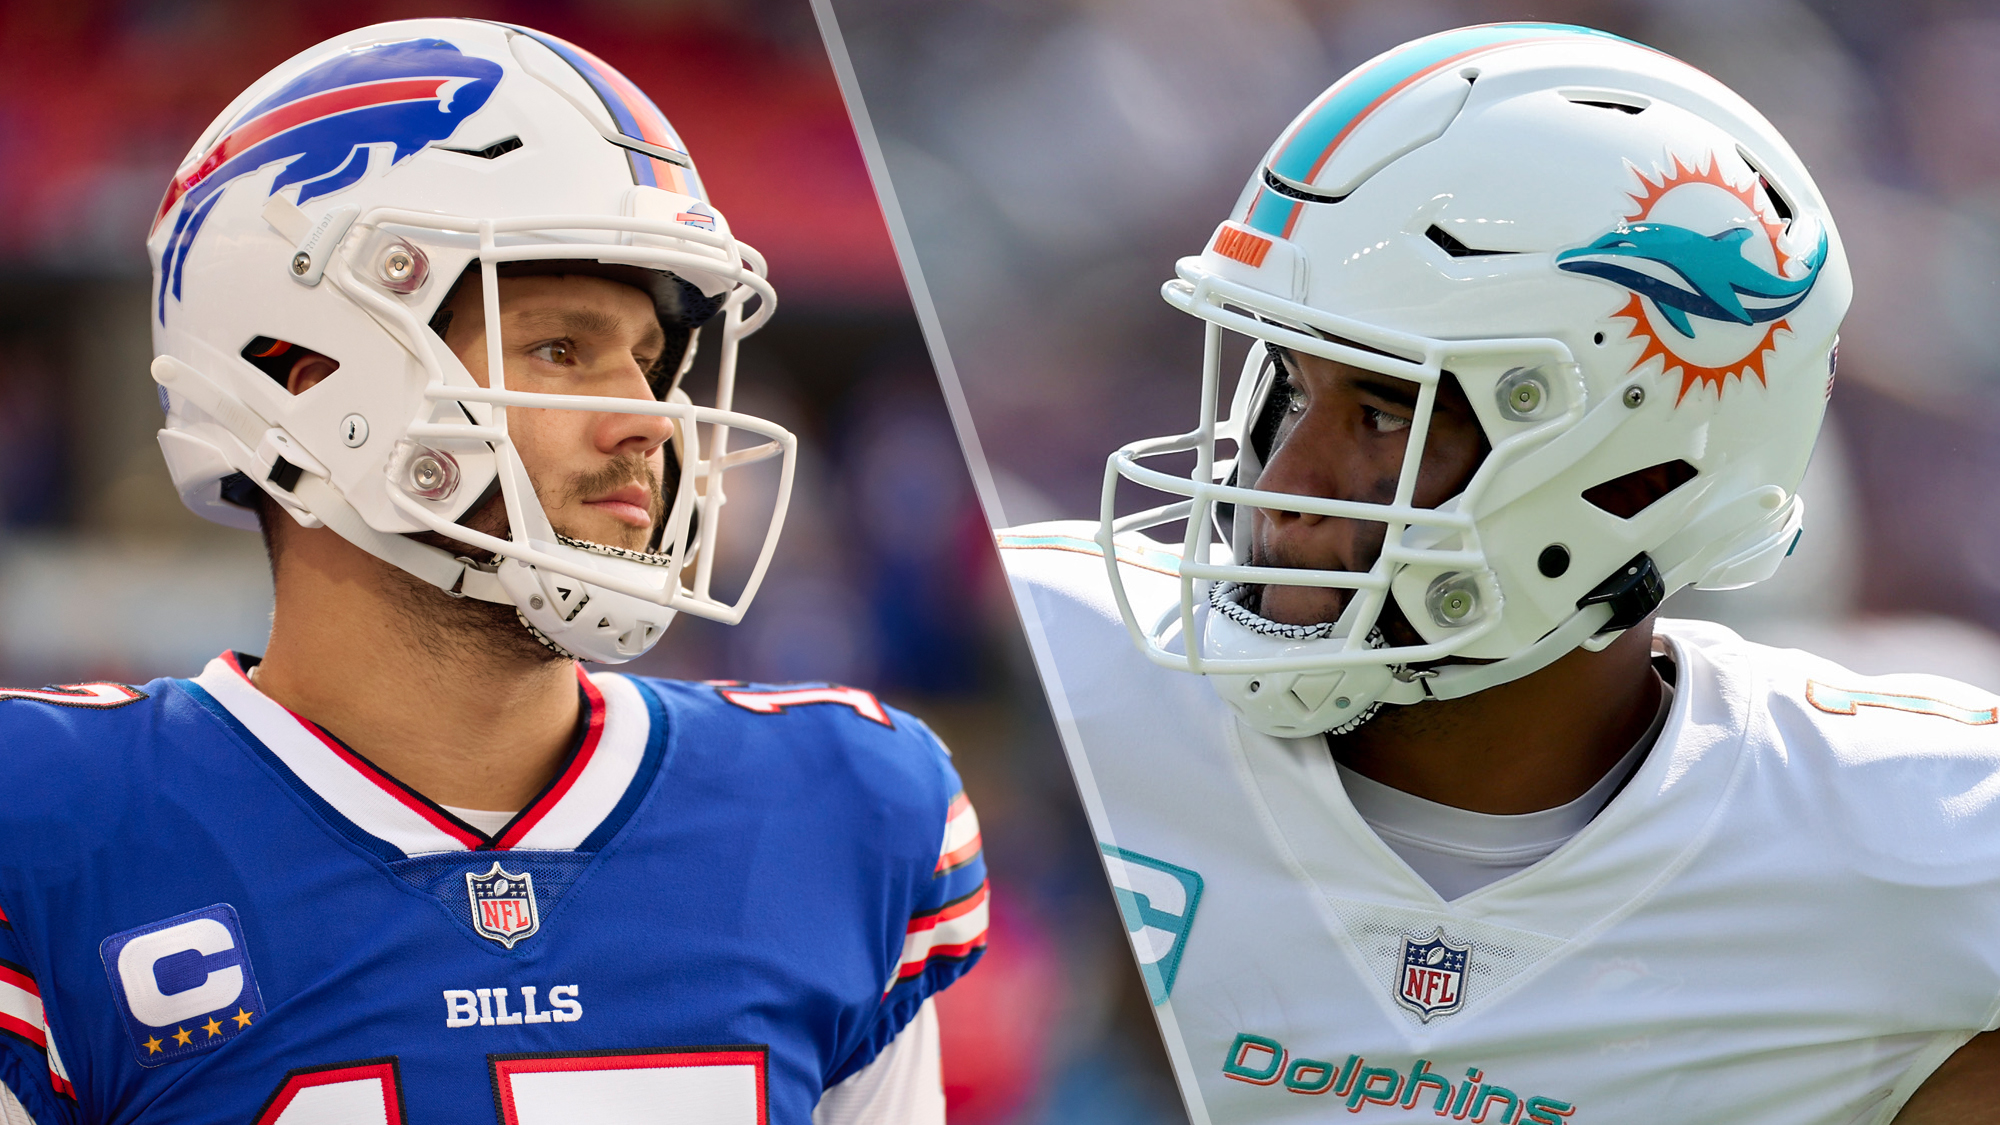 Bills vs Dolphins live stream is today: How to watch NFL week 3 online